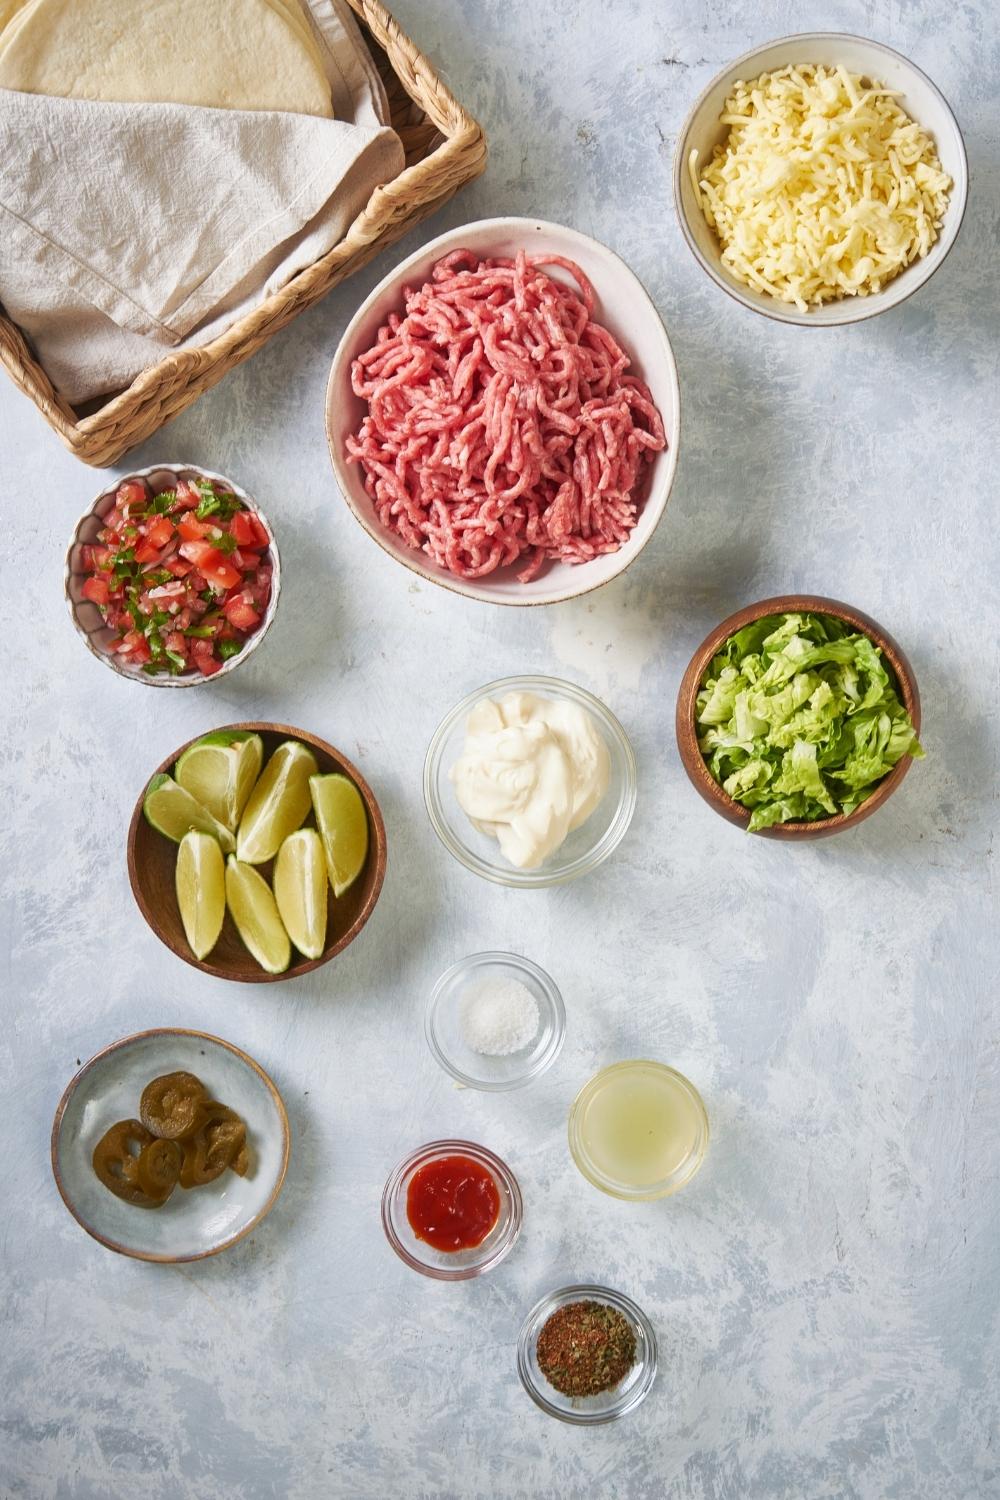 An assortment of ingredients including bowls of raw beef, pico, cheese, lettuce, limes, mayo, chili sauce, and a basket of tortillas.